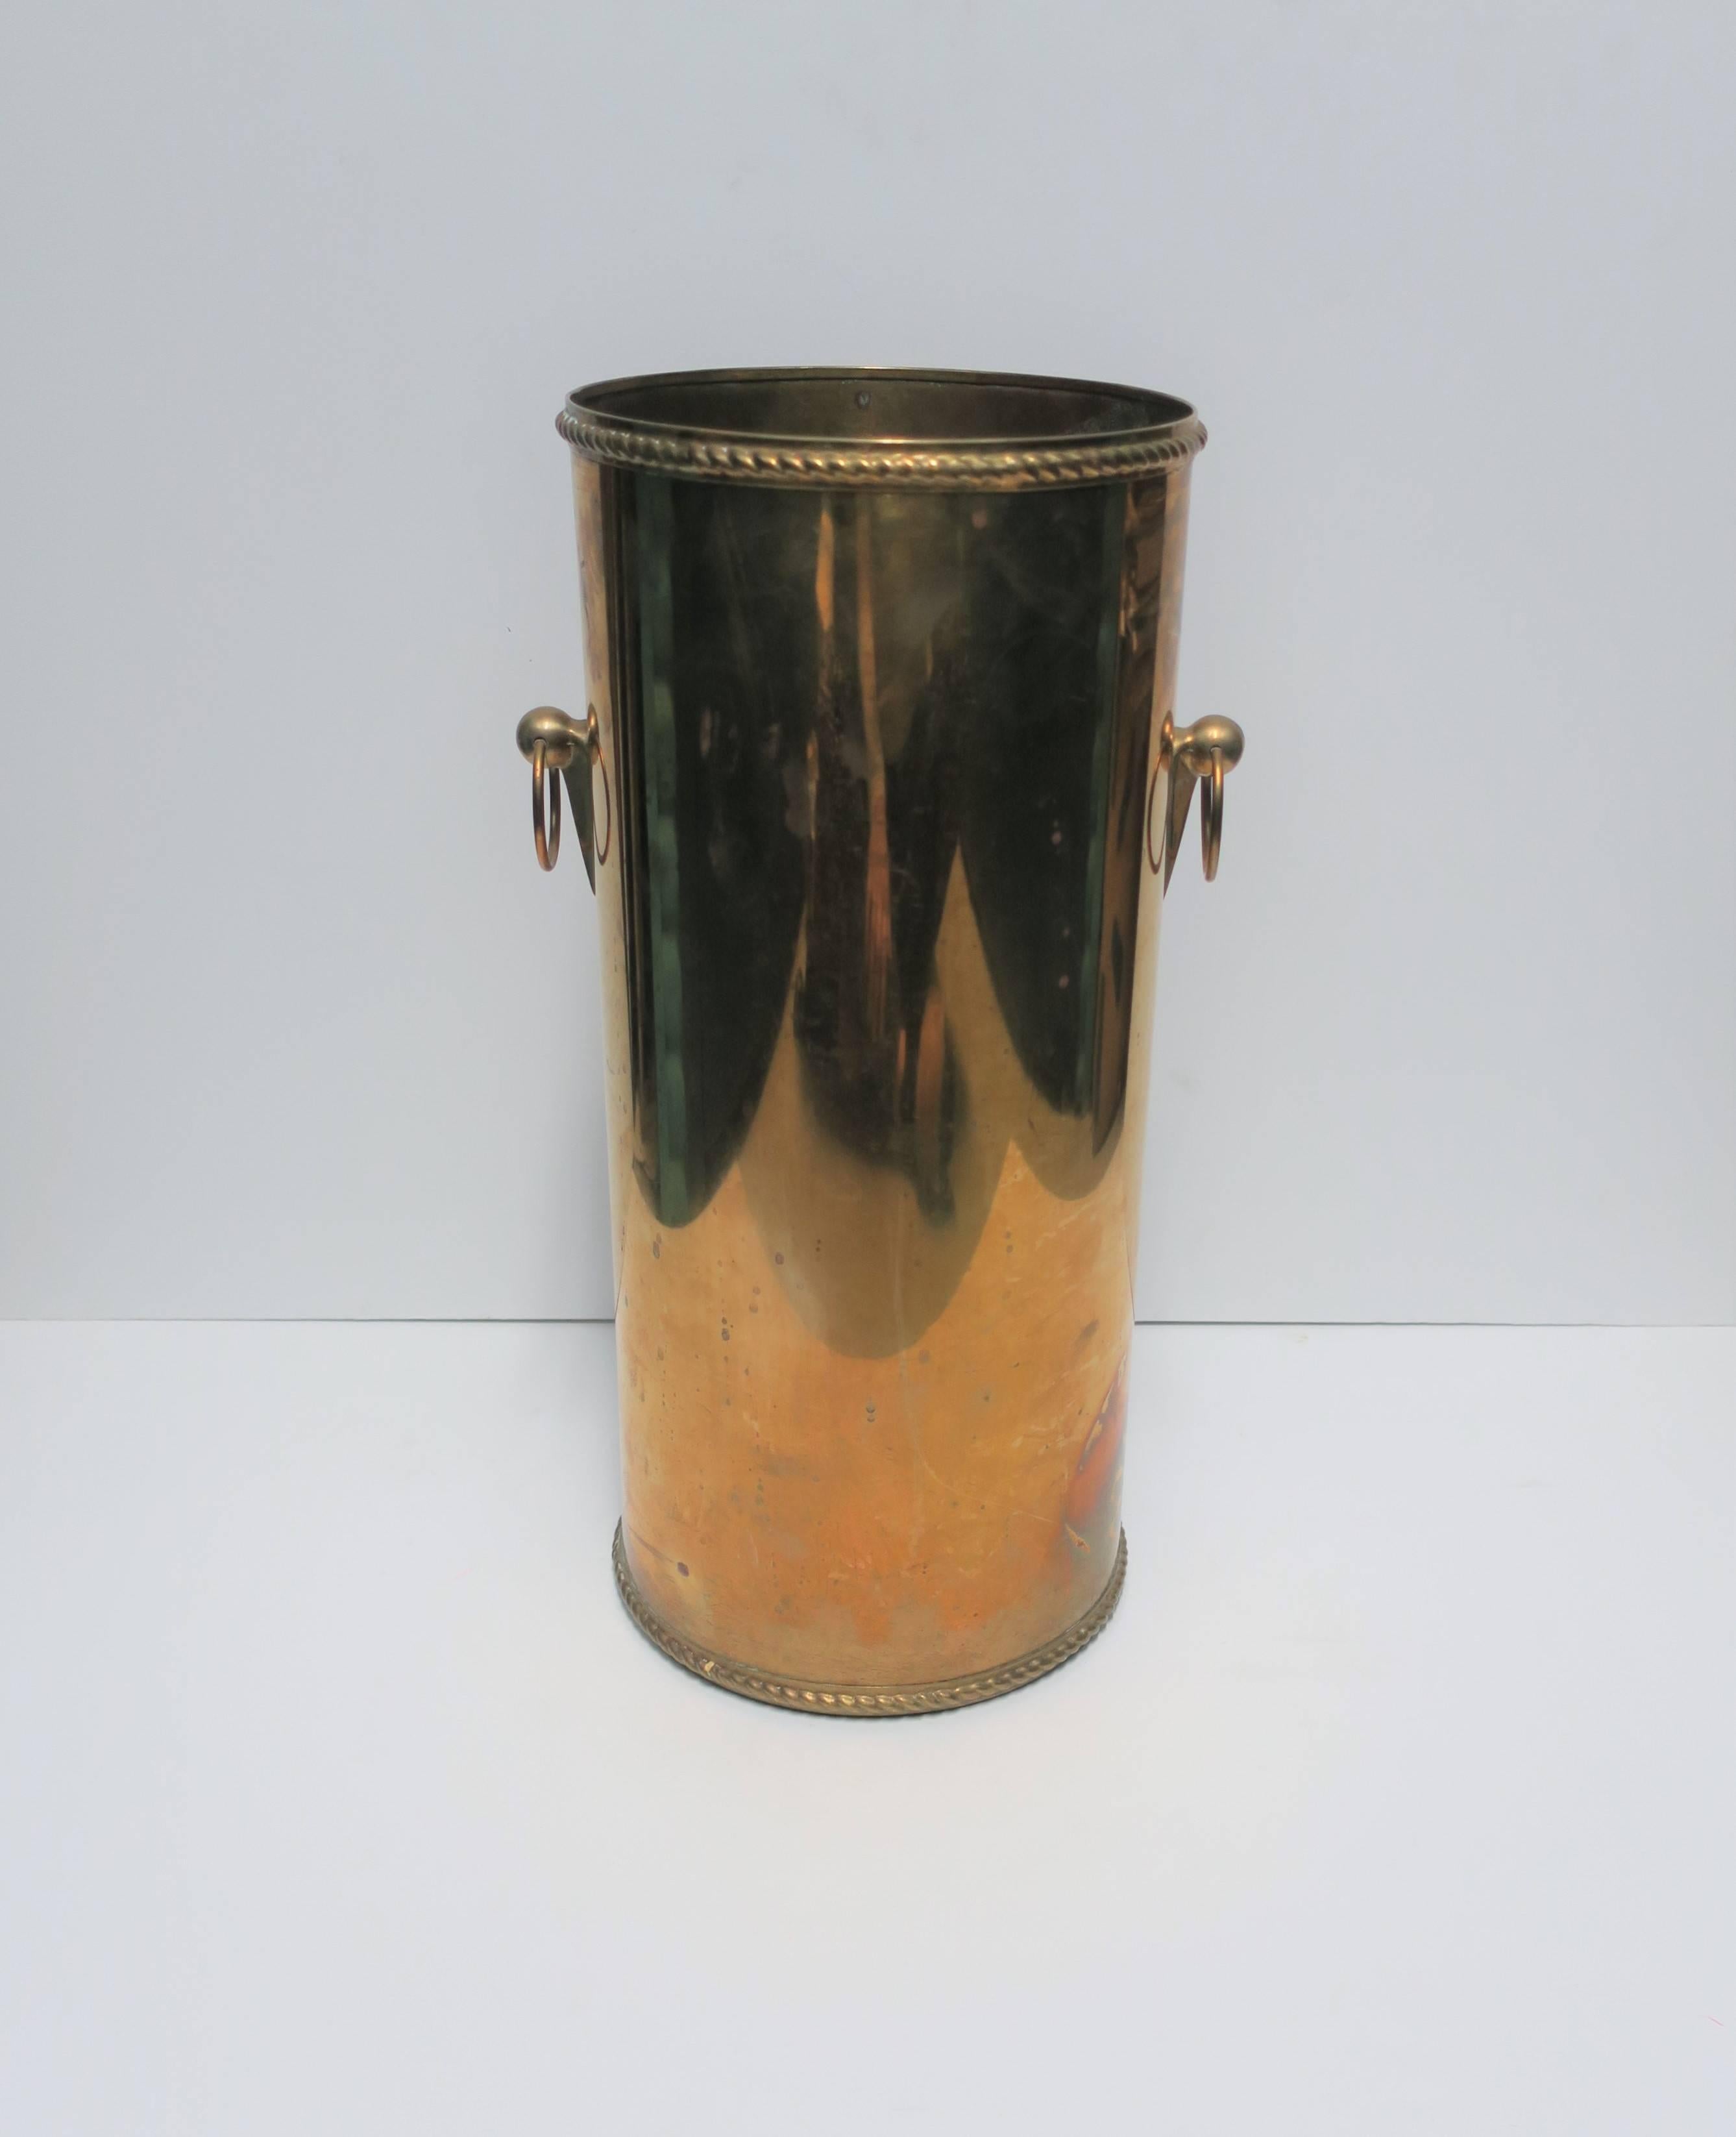 Vintage solid brass umbrella stand with decorative rim at top and base, and decorative spikes on sides supporting the ball and loop handles. 

Piece measures: 8.25